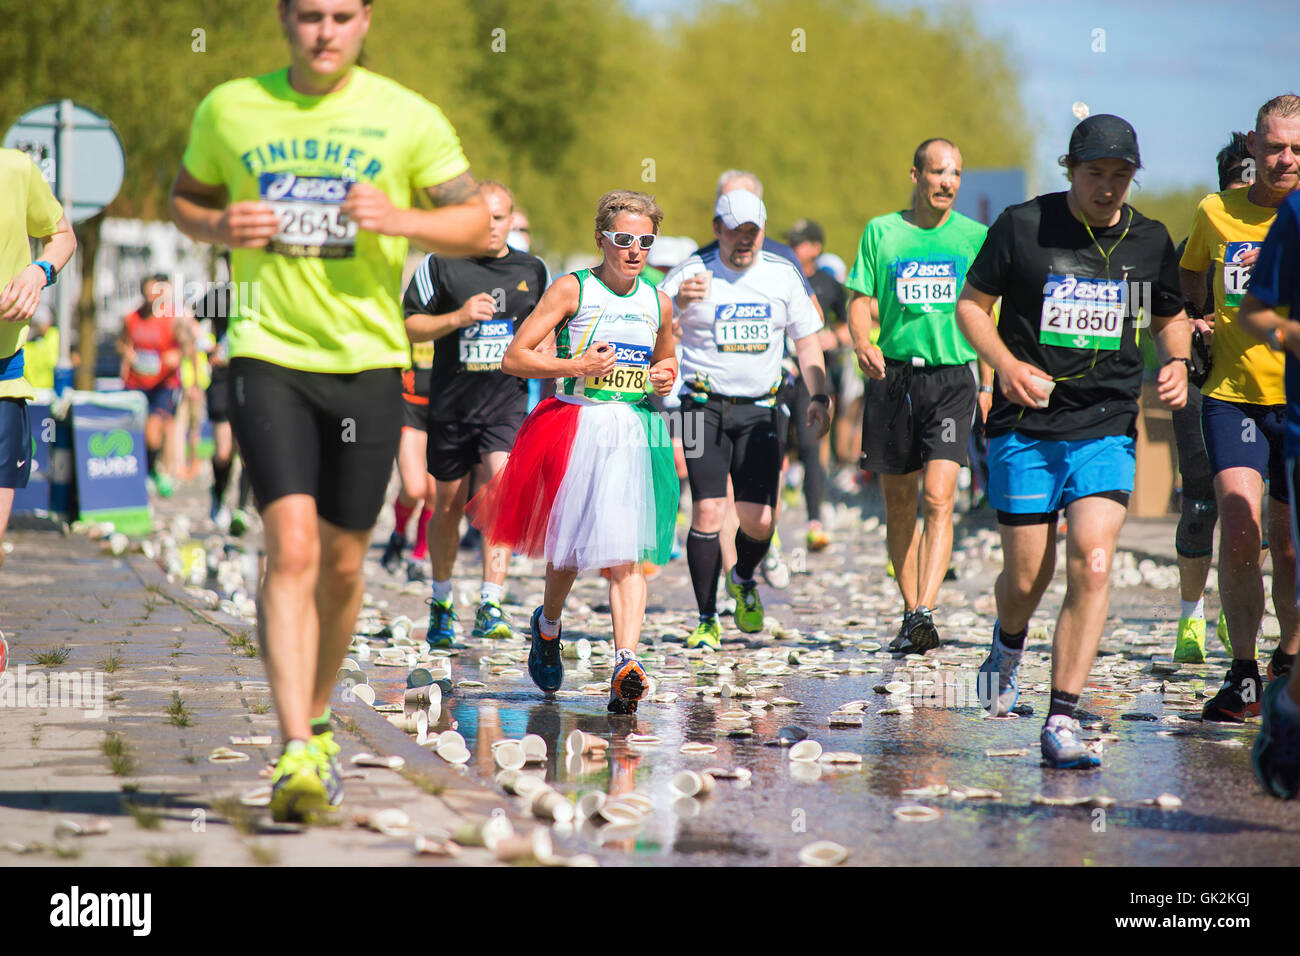 Stockholm Marathon High Resolution Stock Photography and Images - Alamy